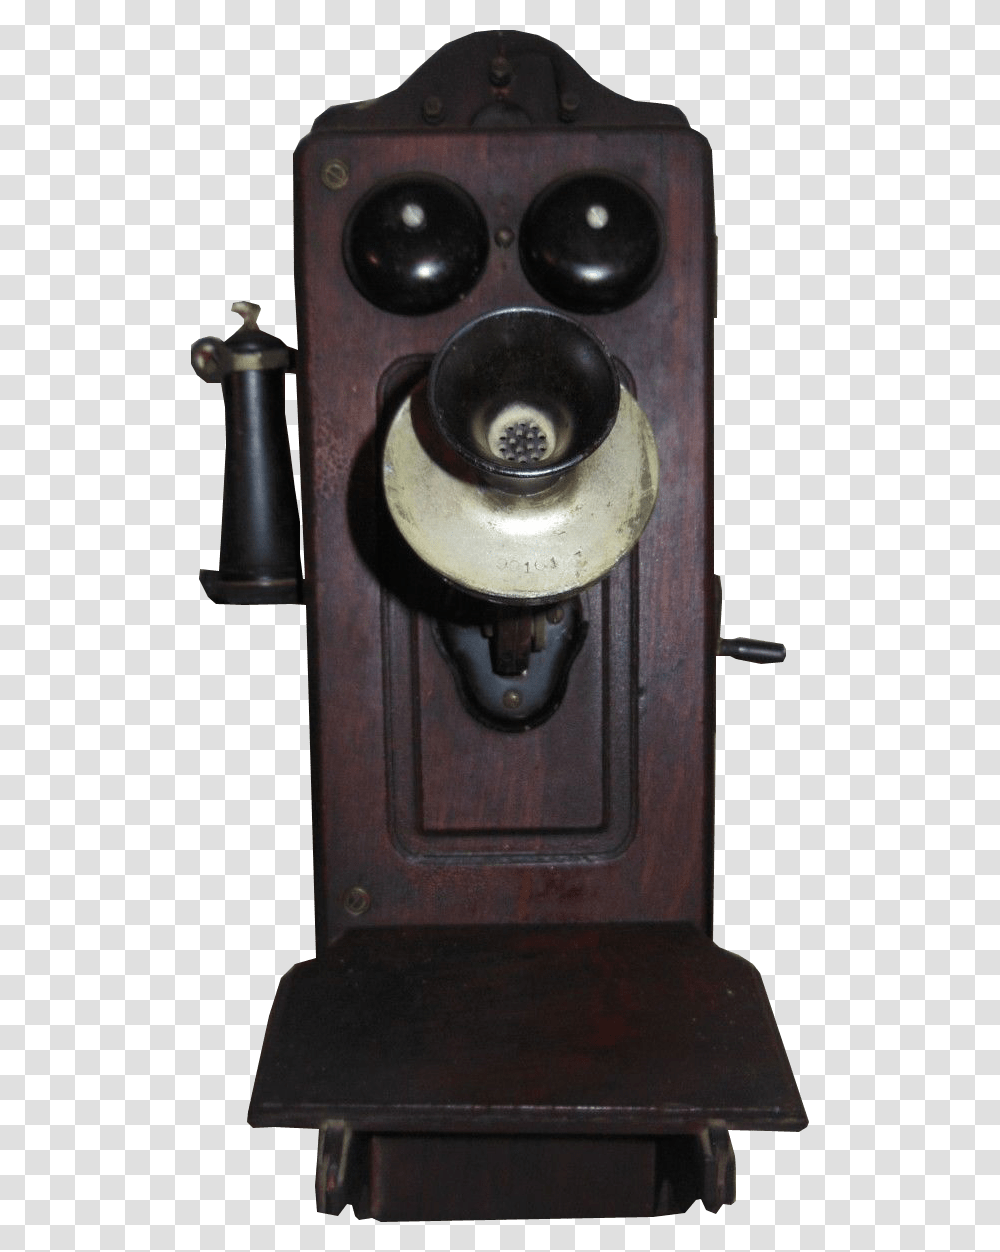 Vintage Wall Mount Telephone Image Old Telephone Clear Background, Electronics, Dial Telephone, Camera Transparent Png